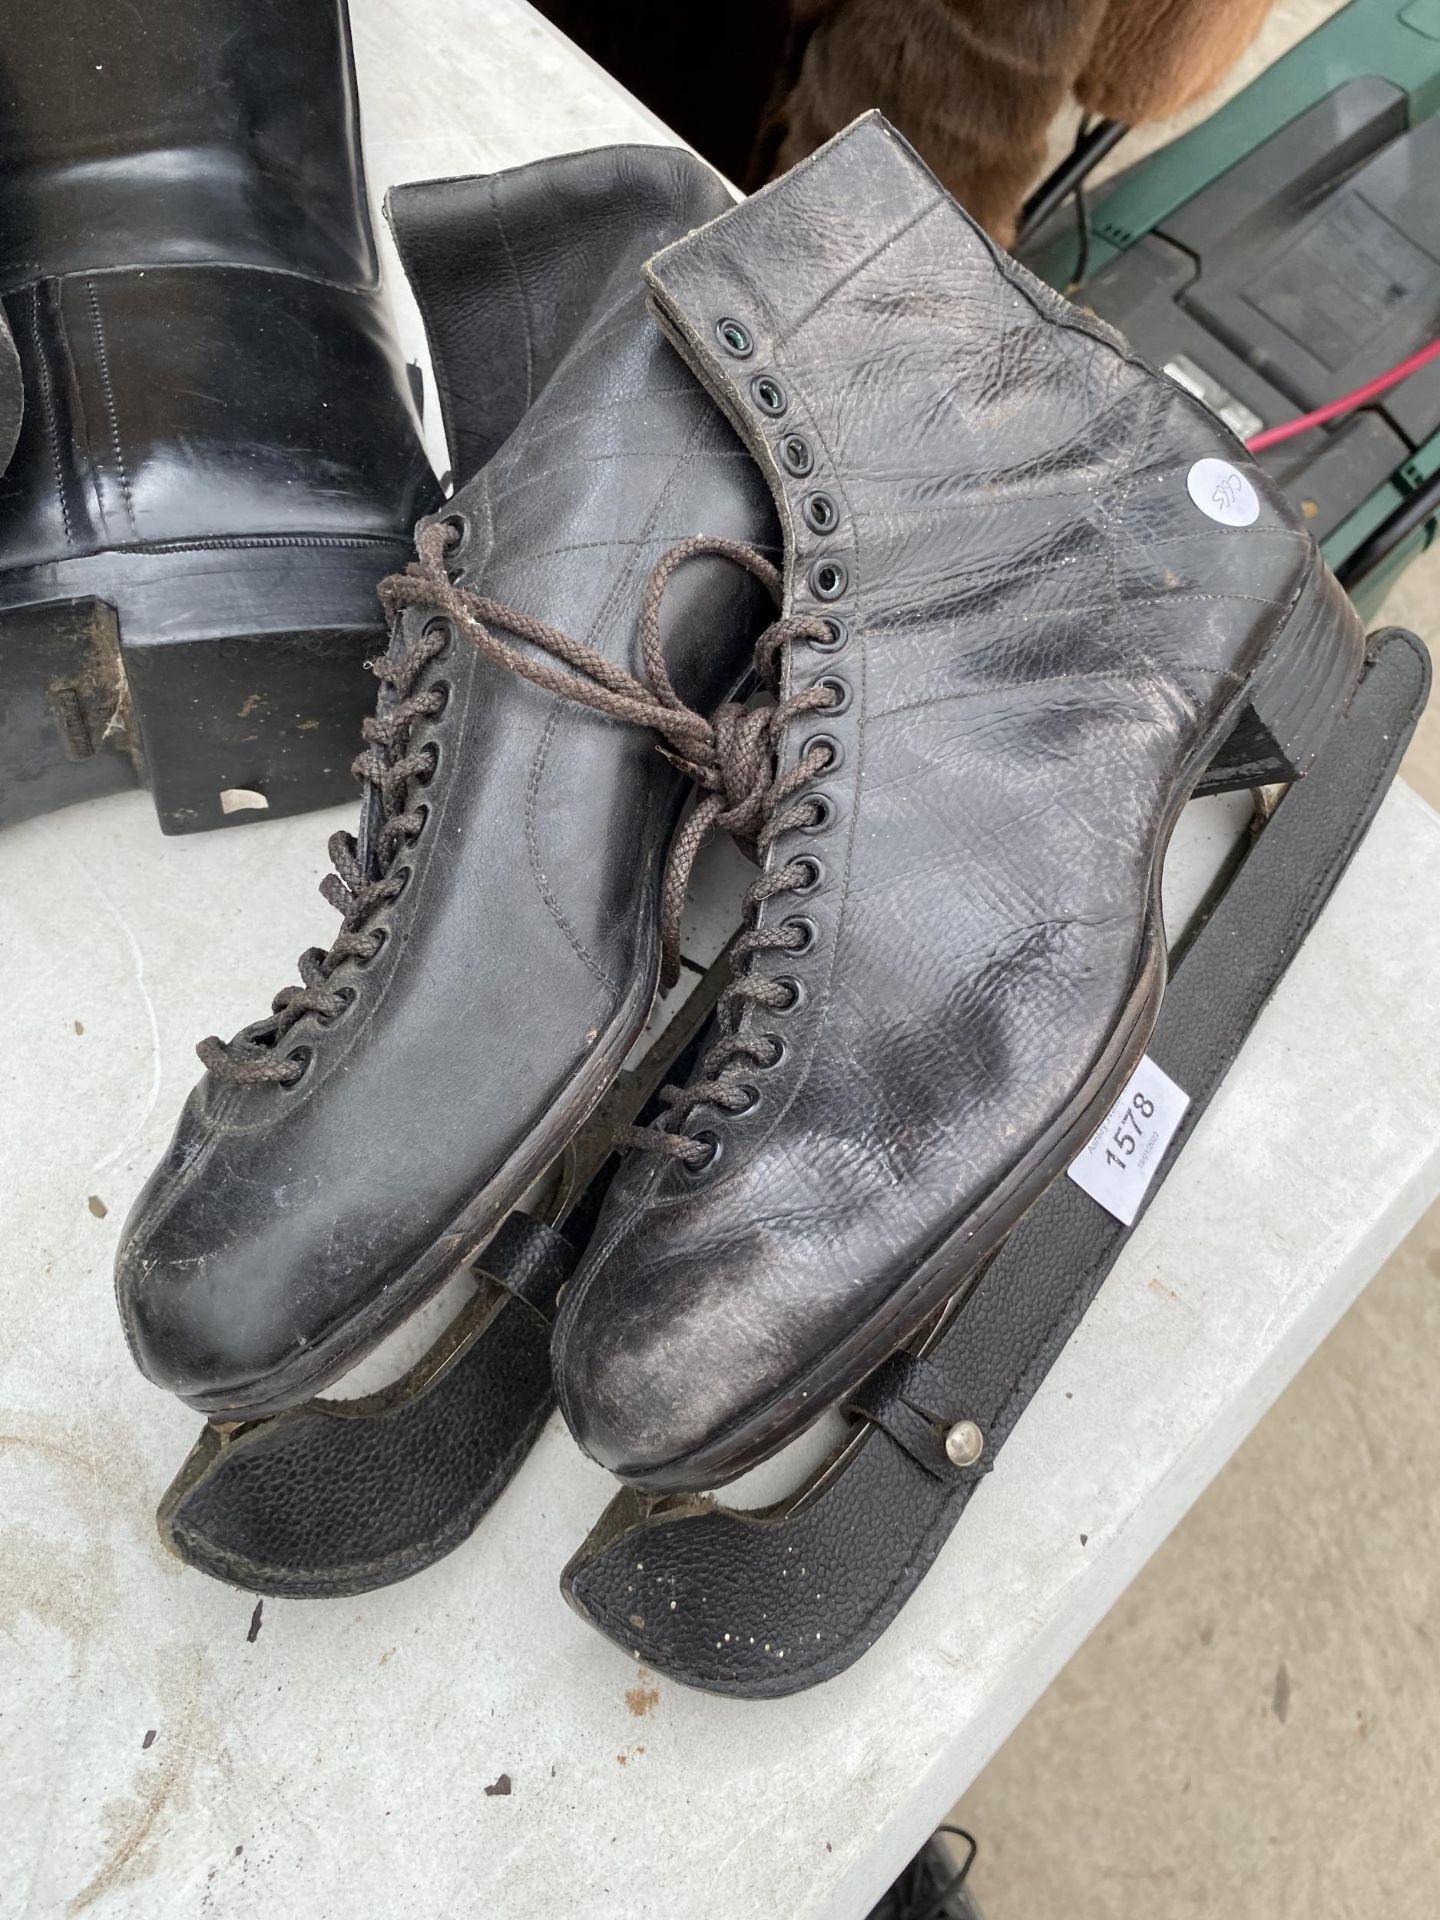 A PAIR OF VINTAGE ICE SKATES AND A PAIR OF RIDING BOOTS - Image 3 of 3